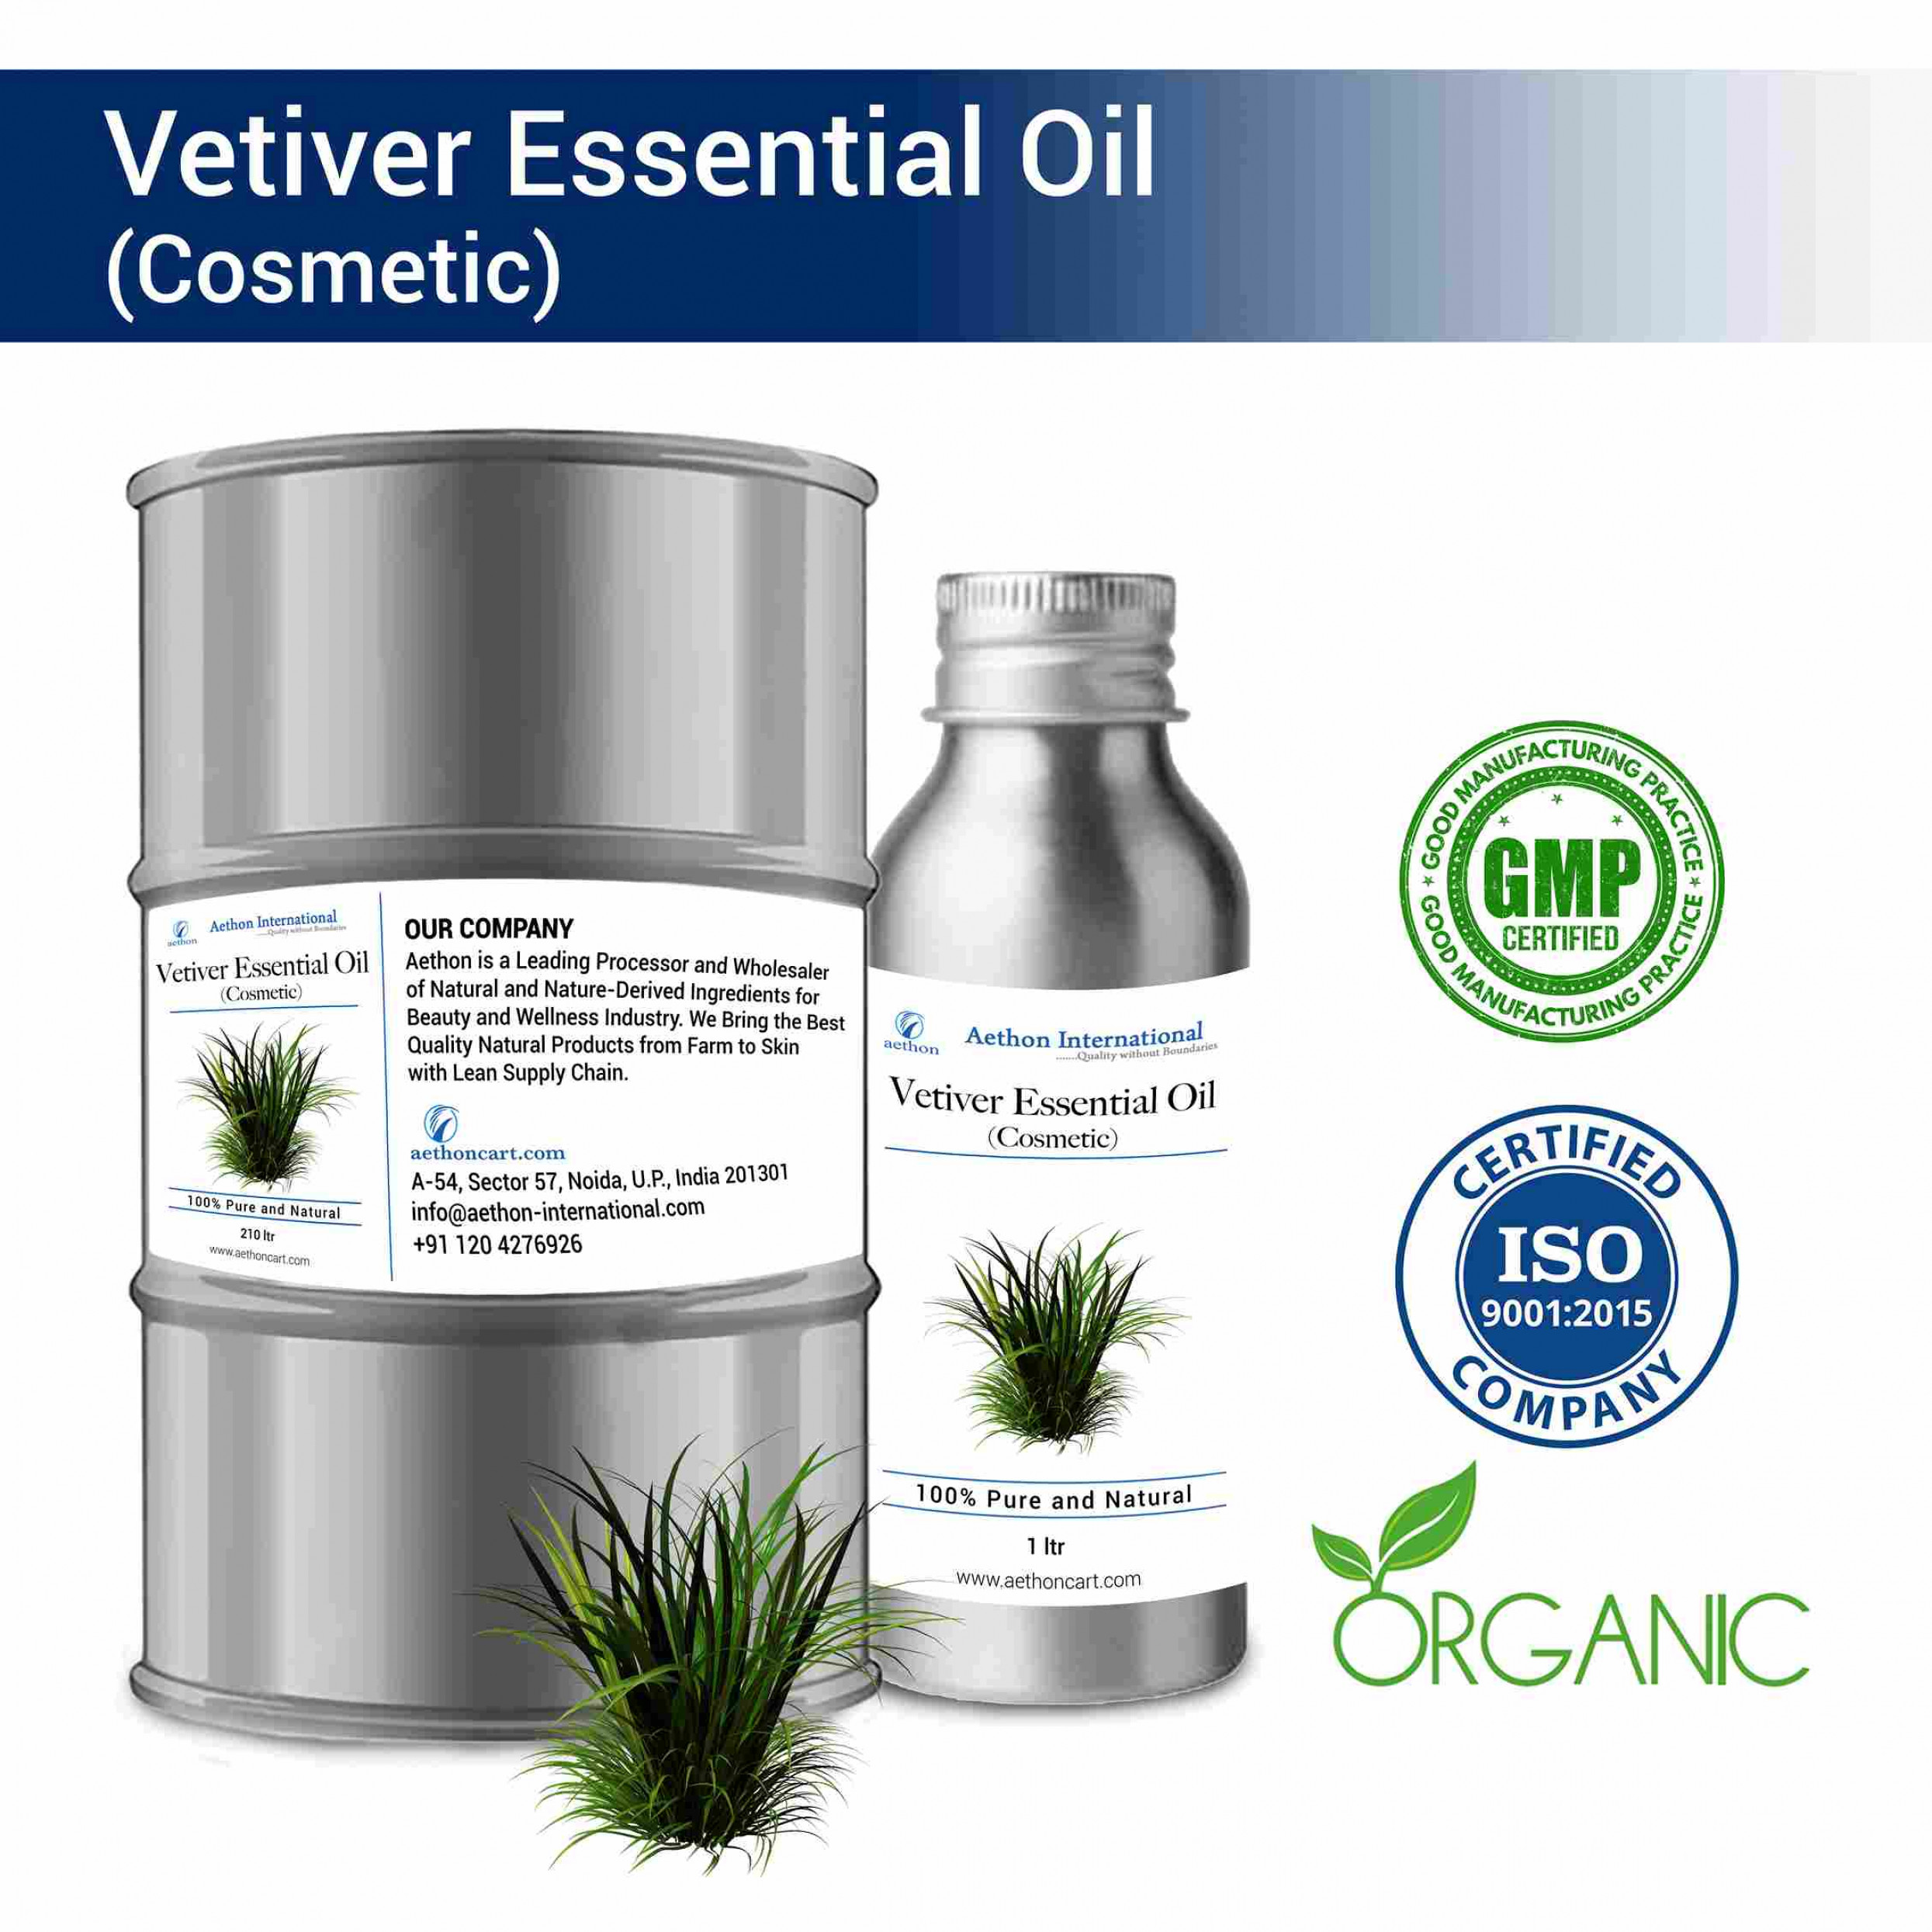 Vetiver Essential Oil (Cosmetic)